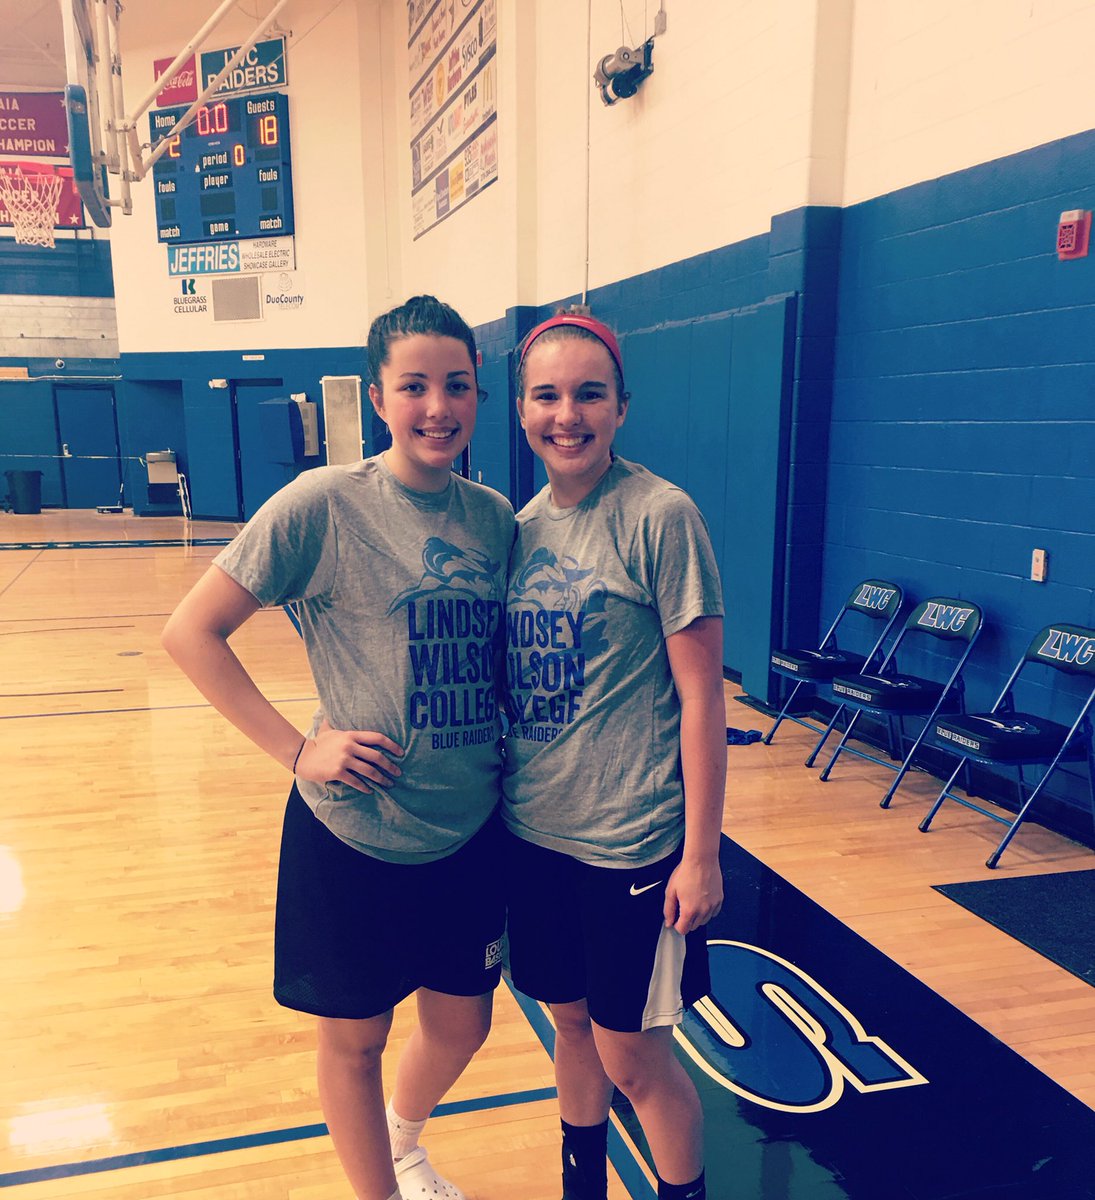 Great day @KentuckyPremier  Skills Camp! Thank you @BlueRaiderHoops @CousinTrevvv-truly feel blessed by the opportunity! @kenzie_maynard_ 💚💙